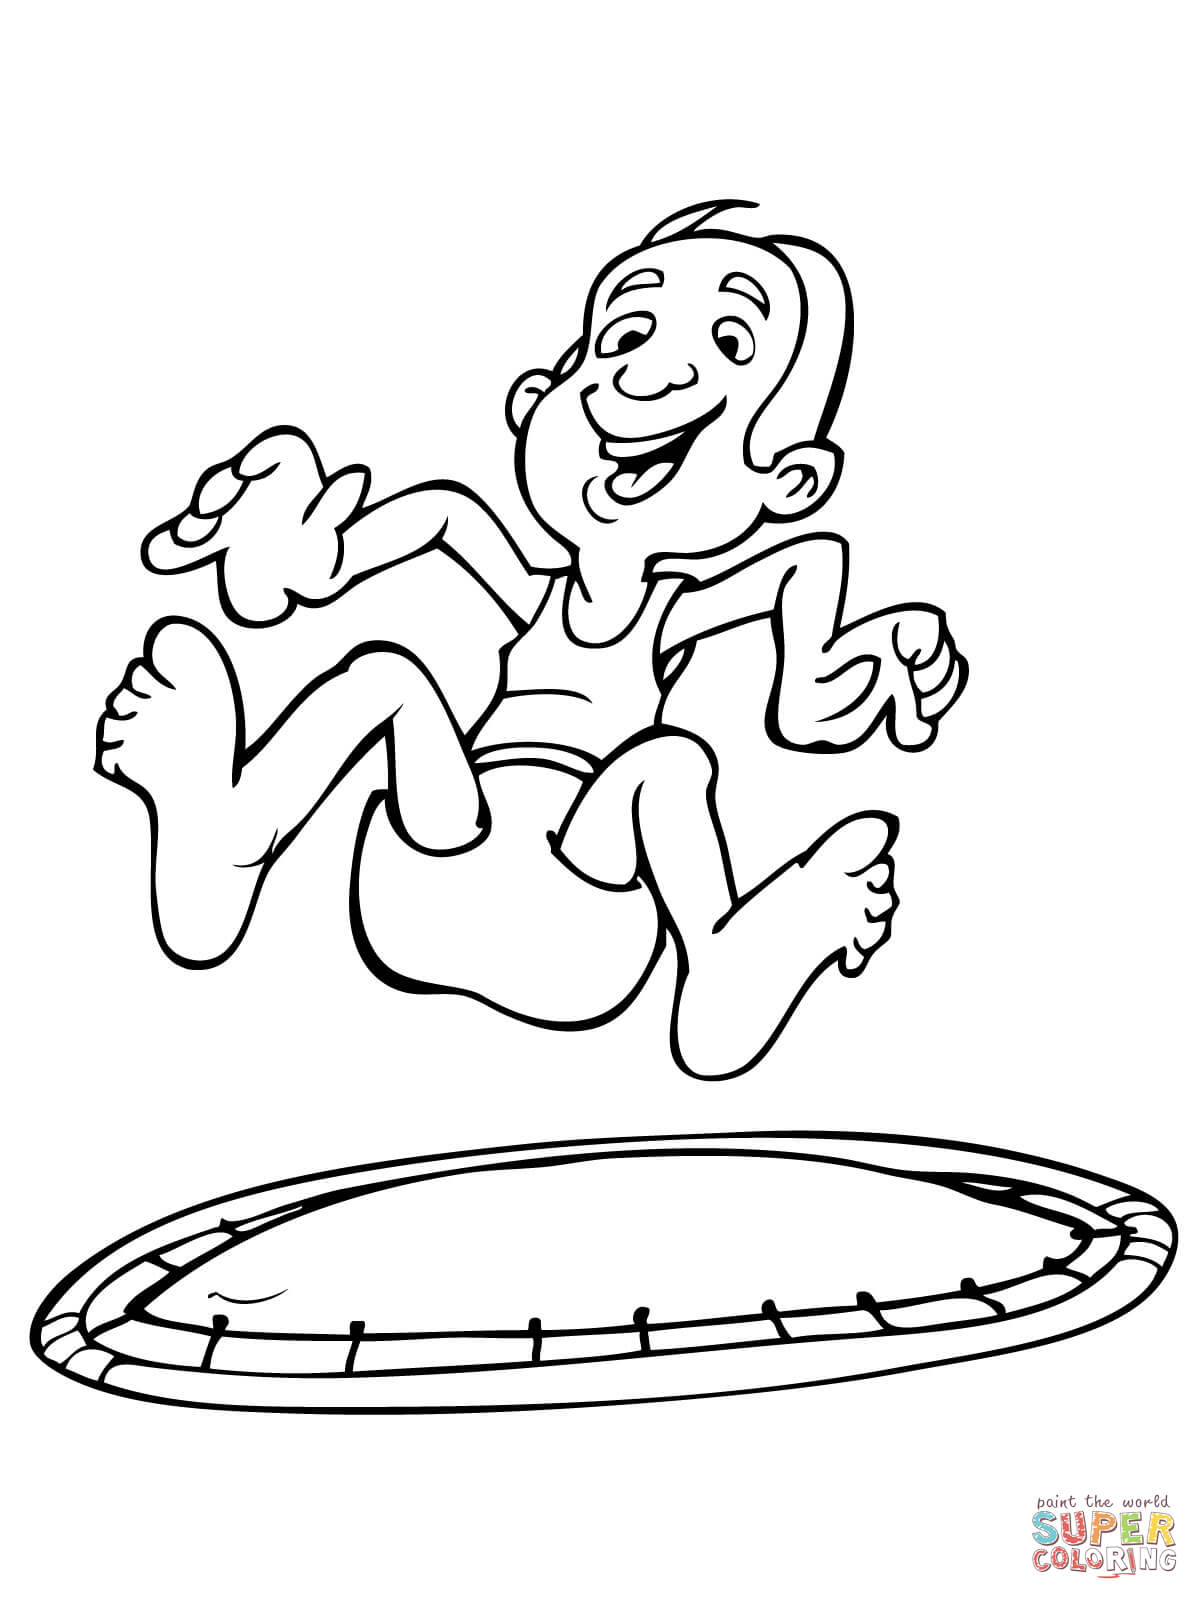 Kid Jumping on the Trampoline coloring page | Free Printable ...